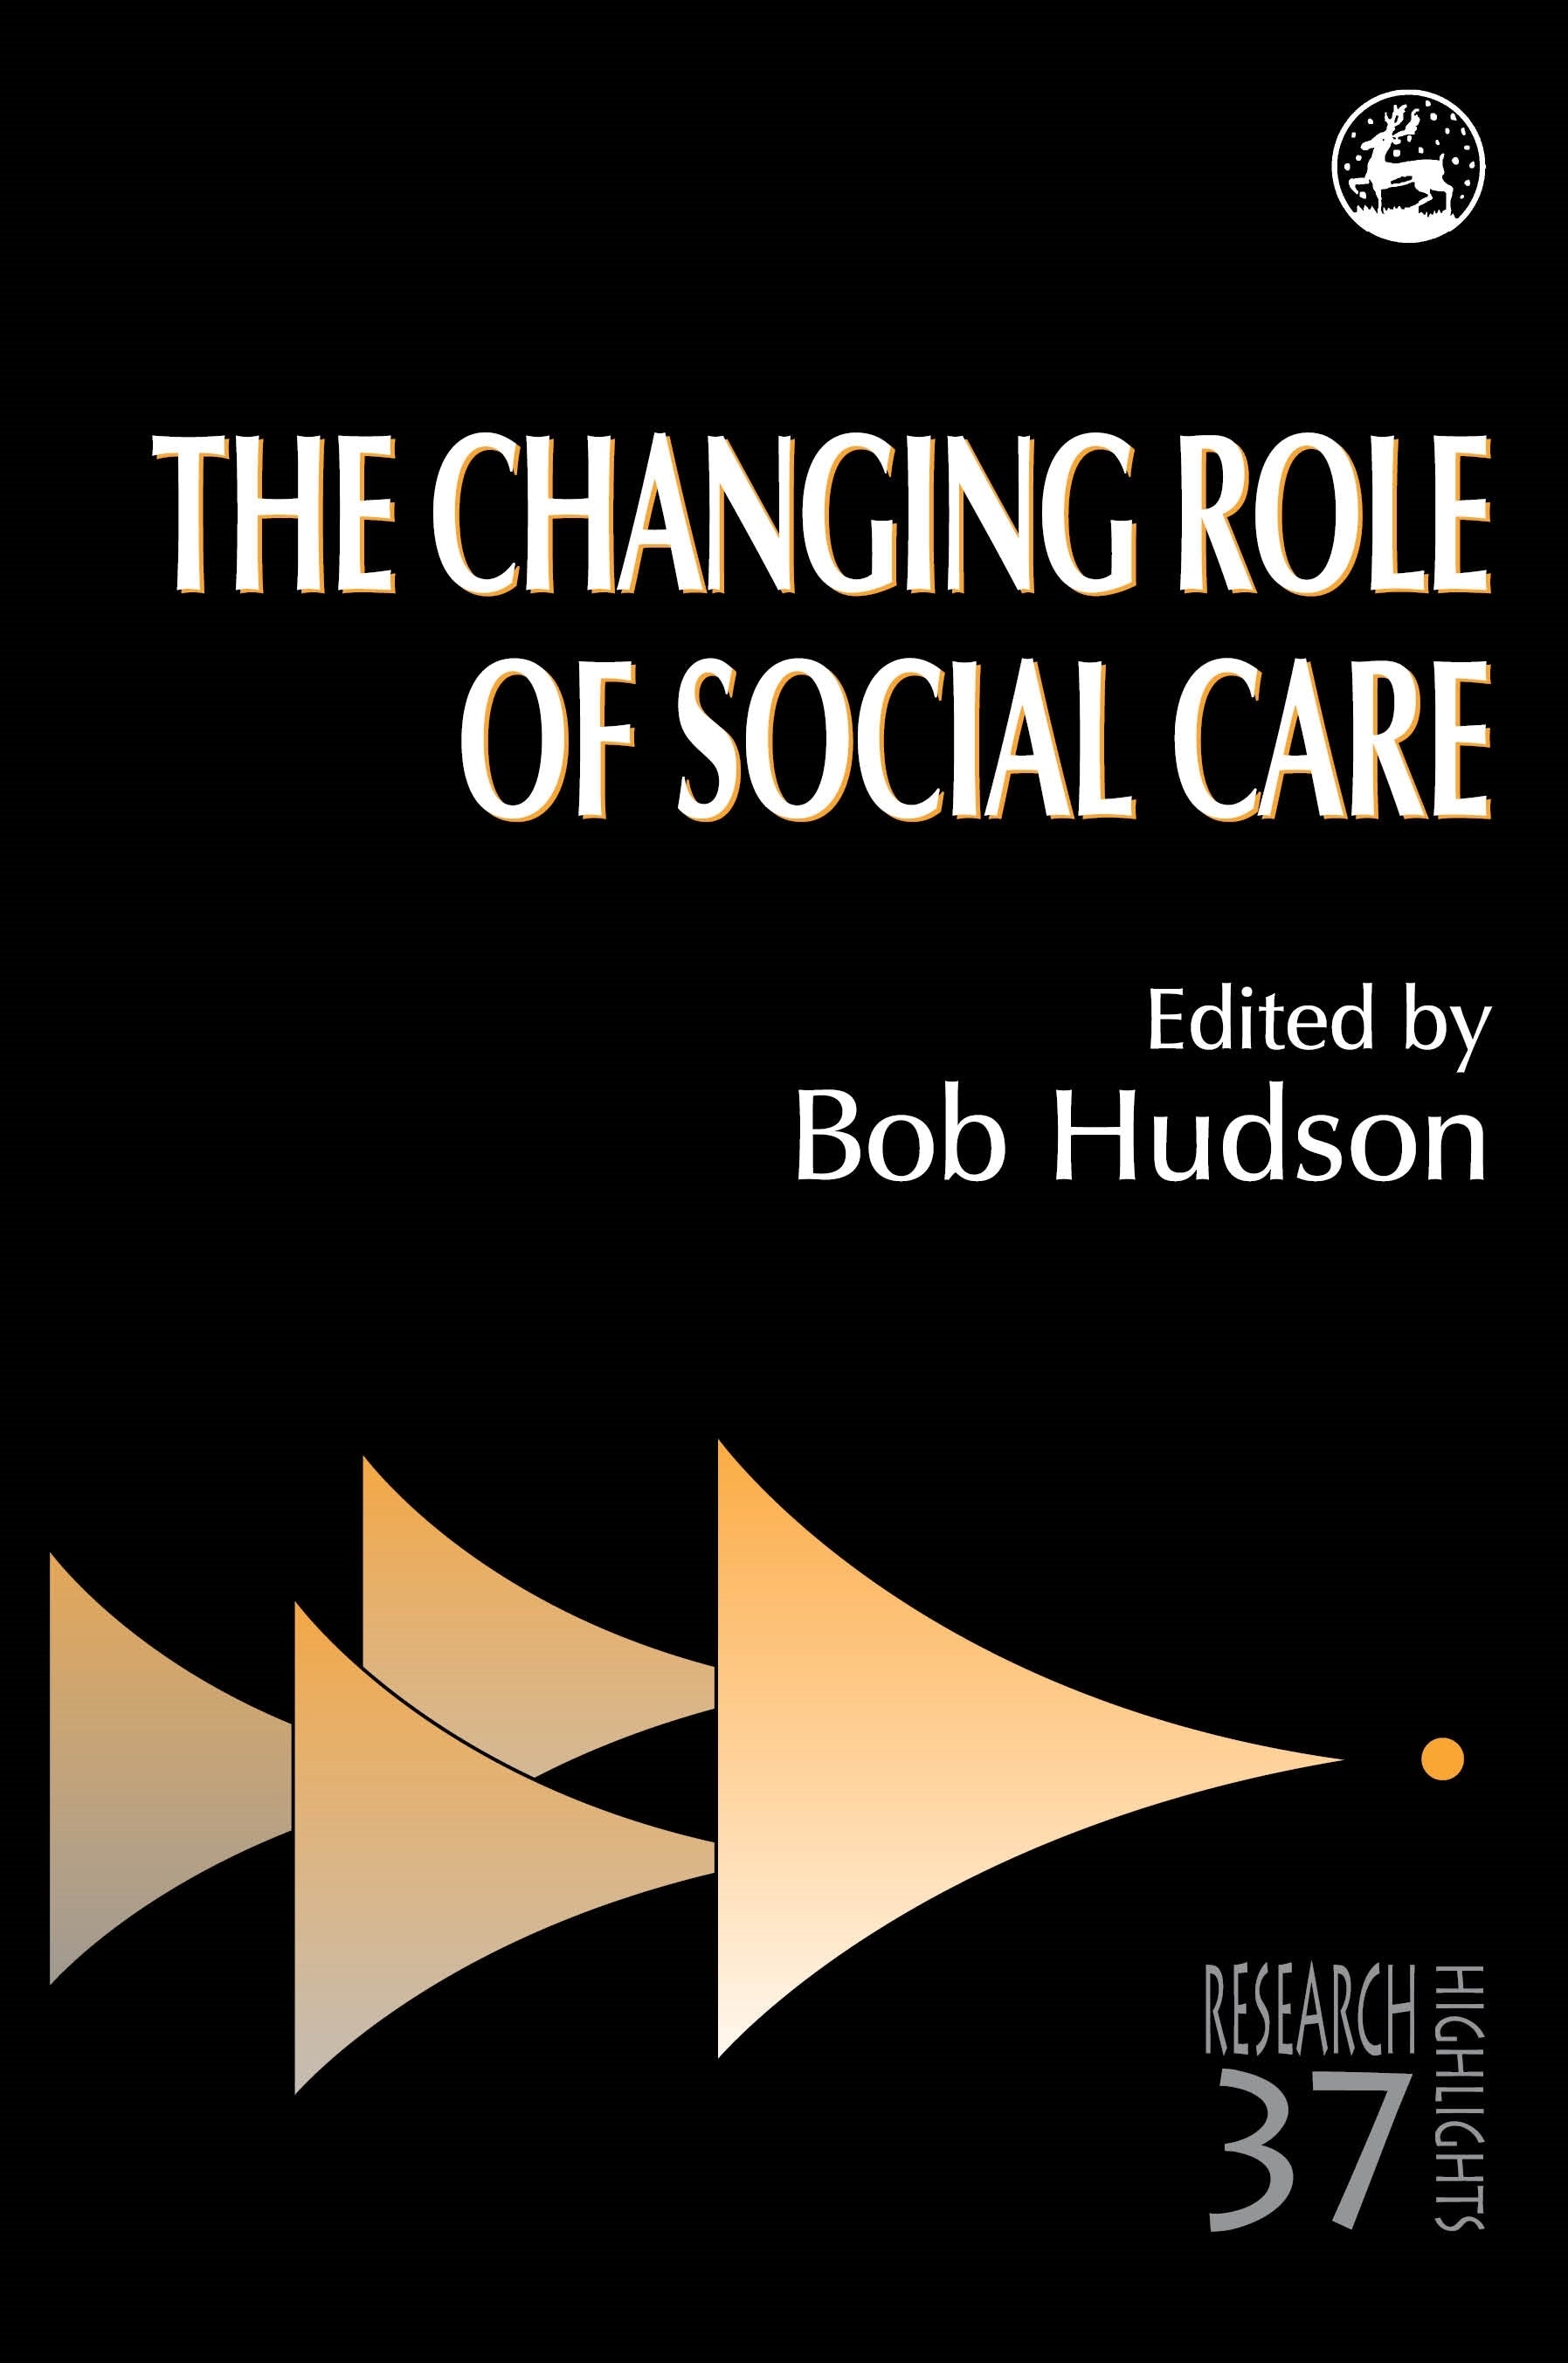 The Changing Role of Social Care by Bob Hudson